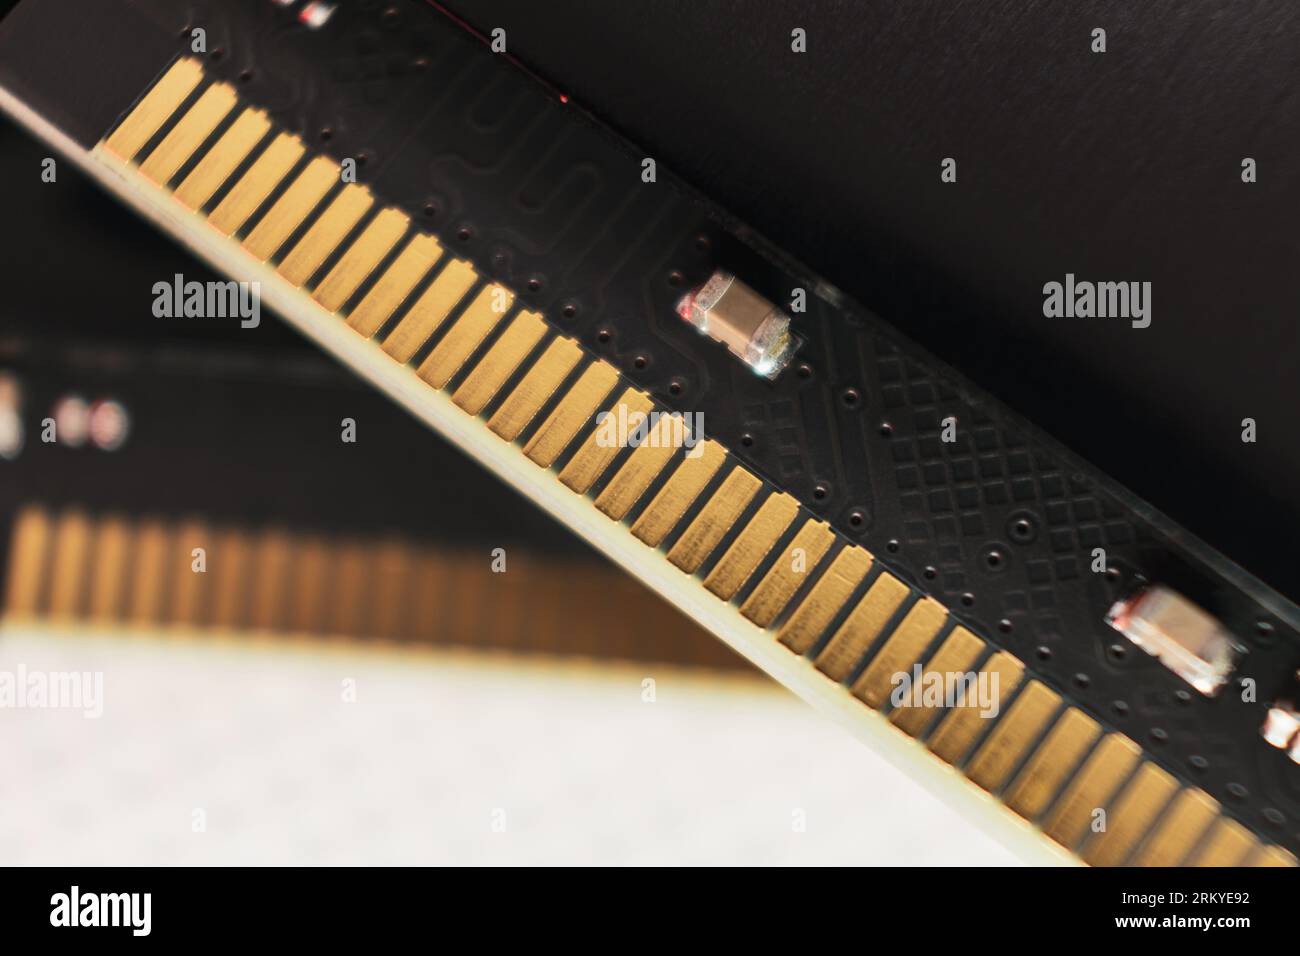 DDR4 DRAM memory module golden electrical contact macro. Computer RAM  chipset close-up. Desktop PC memory hardware components Stock Photo - Alamy